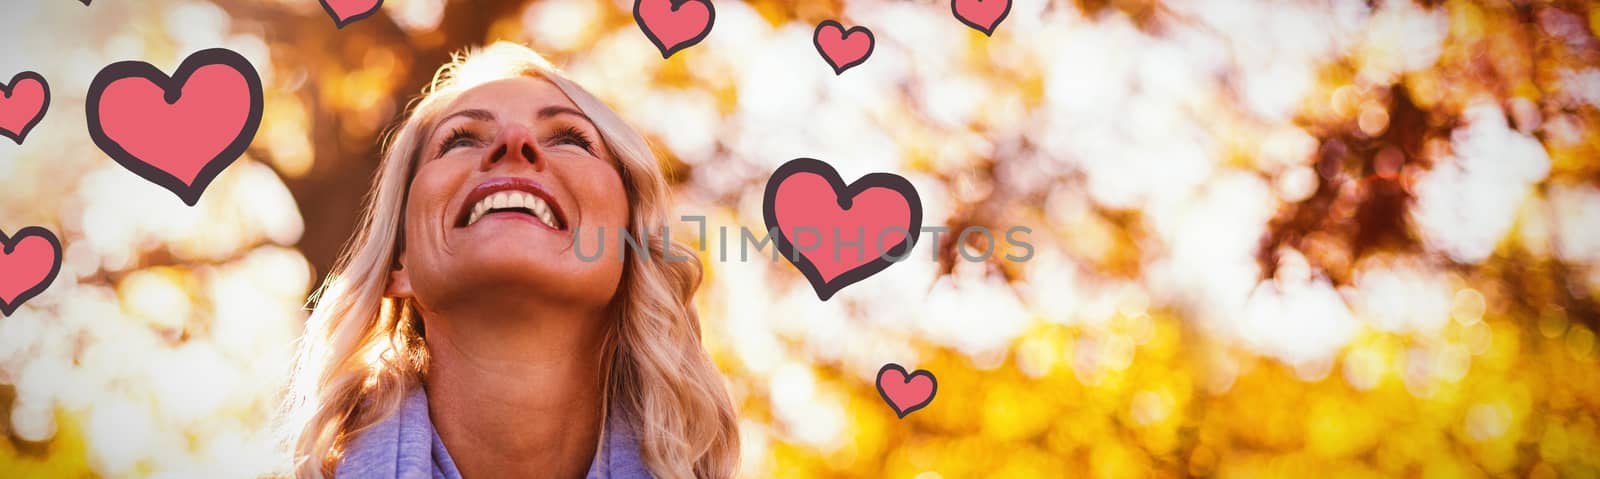 Red Hearts against smiling woman looking up against trees